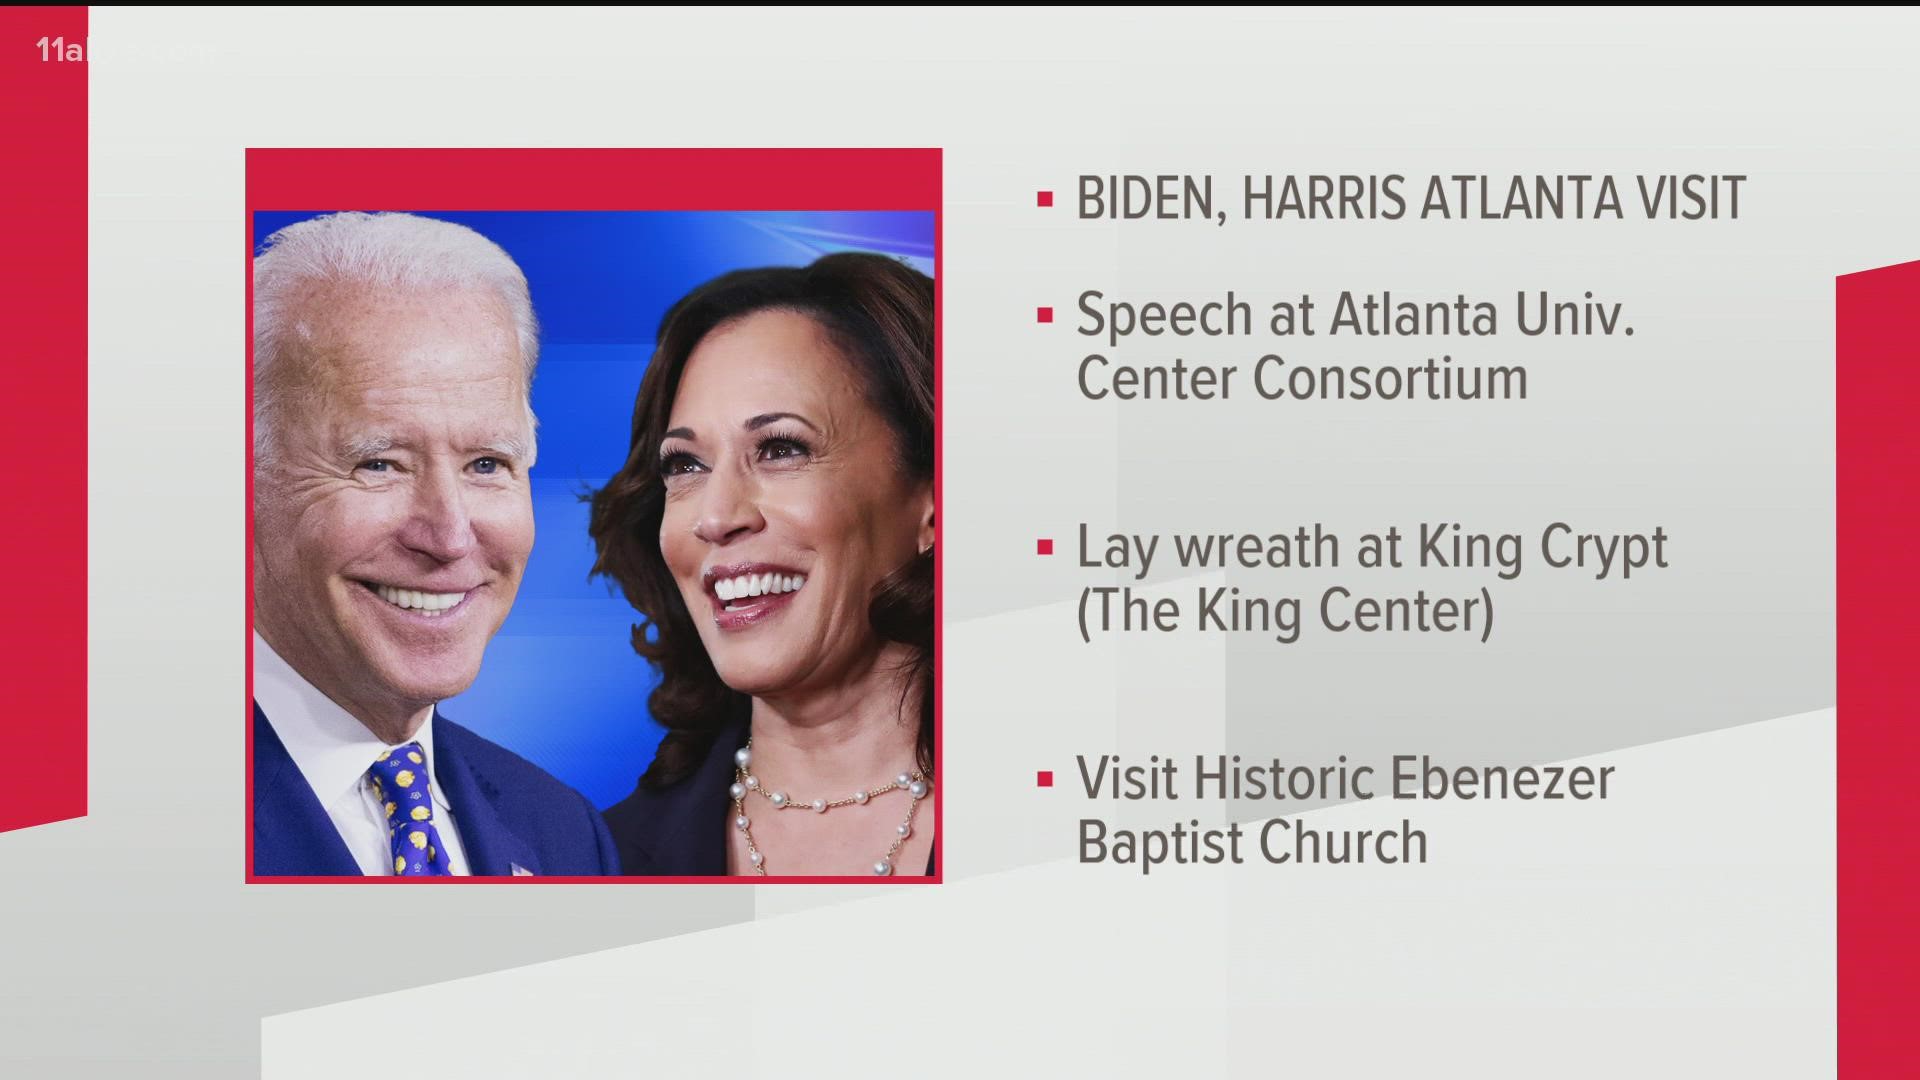 They will make remarks at the Atlanta University Center and then visit the King Center.